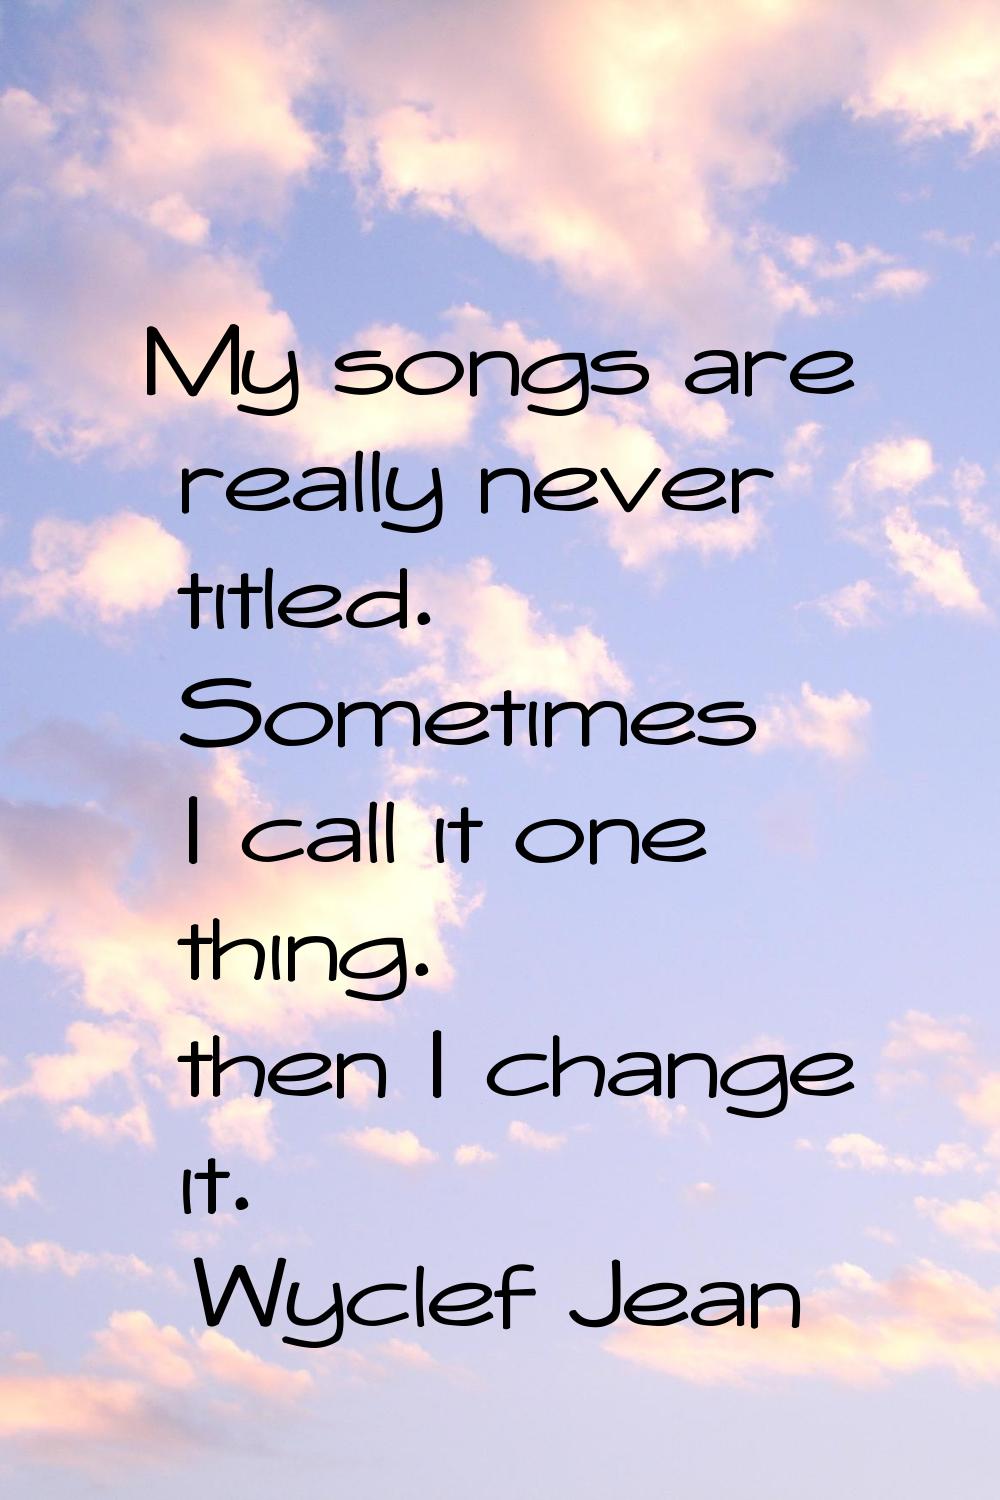 My songs are really never titled. Sometimes I call it one thing. then I change it.